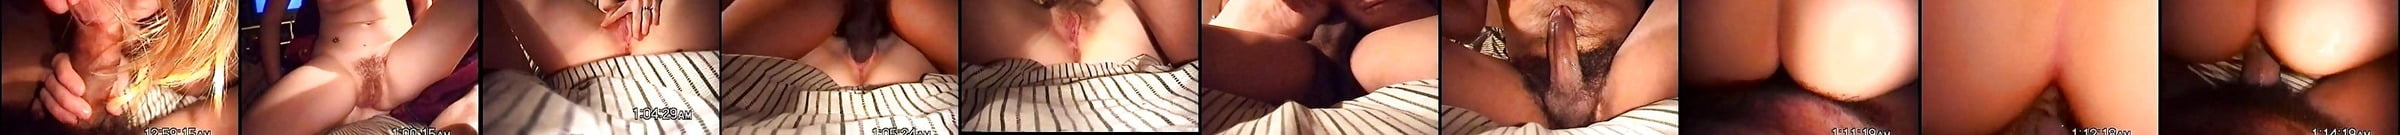 Hairy Amateur Wife Vhs Re Edit Real Homemade Free Porn 6f